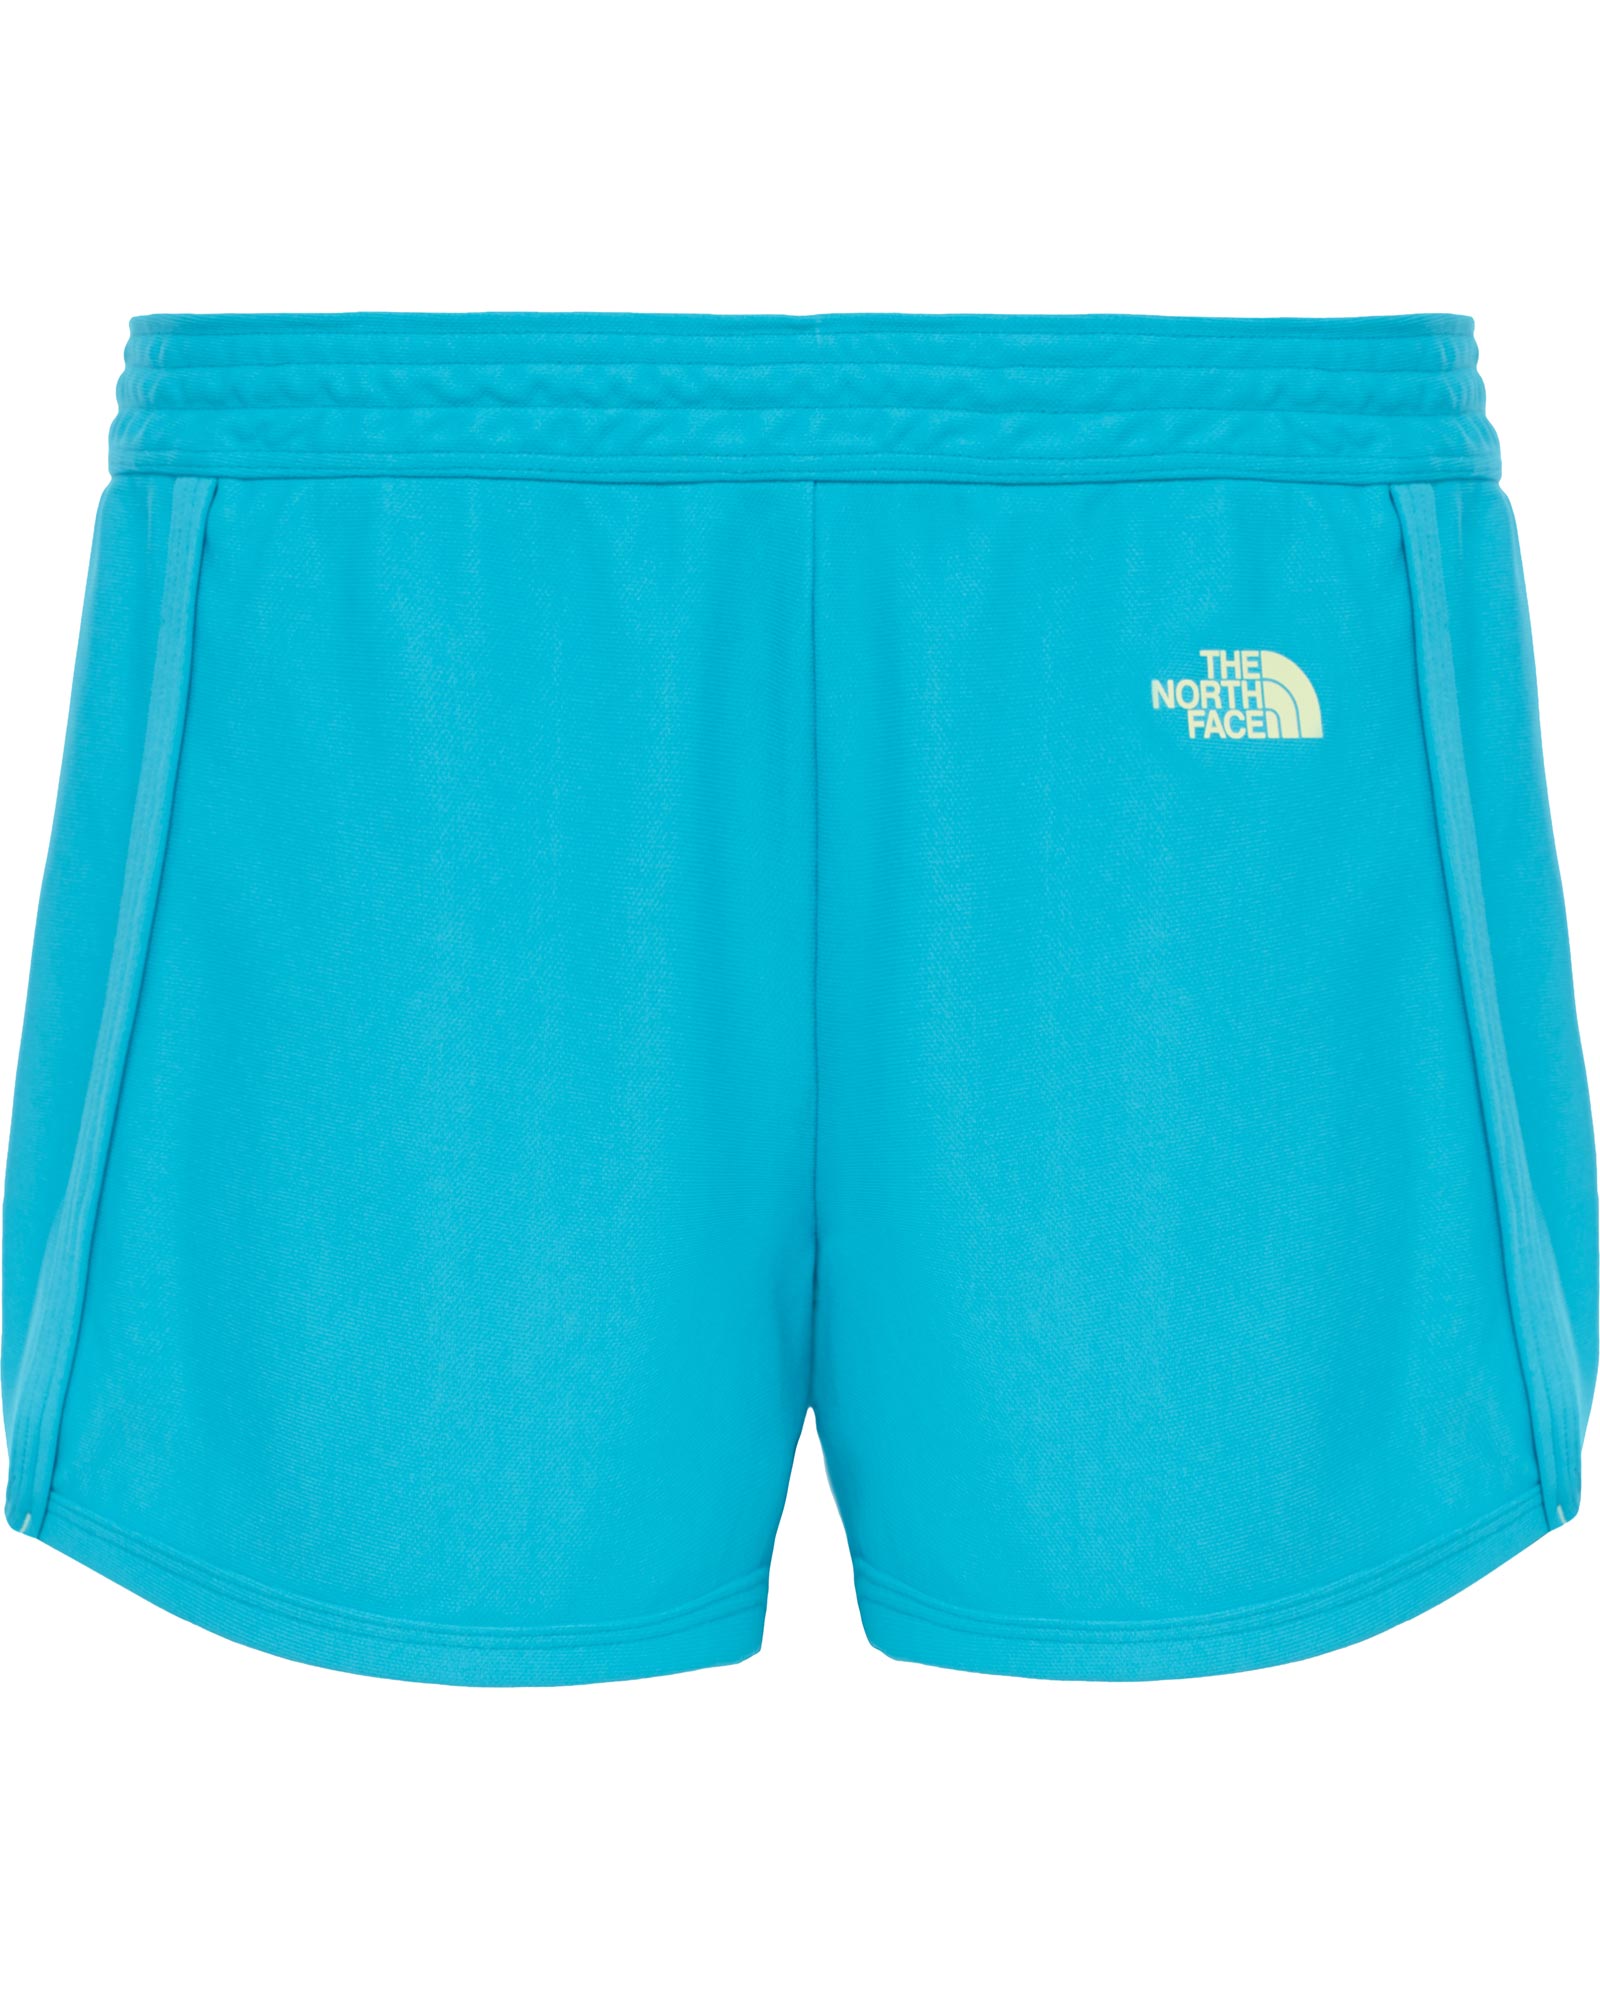 The North Face Pulse Womens Shorts